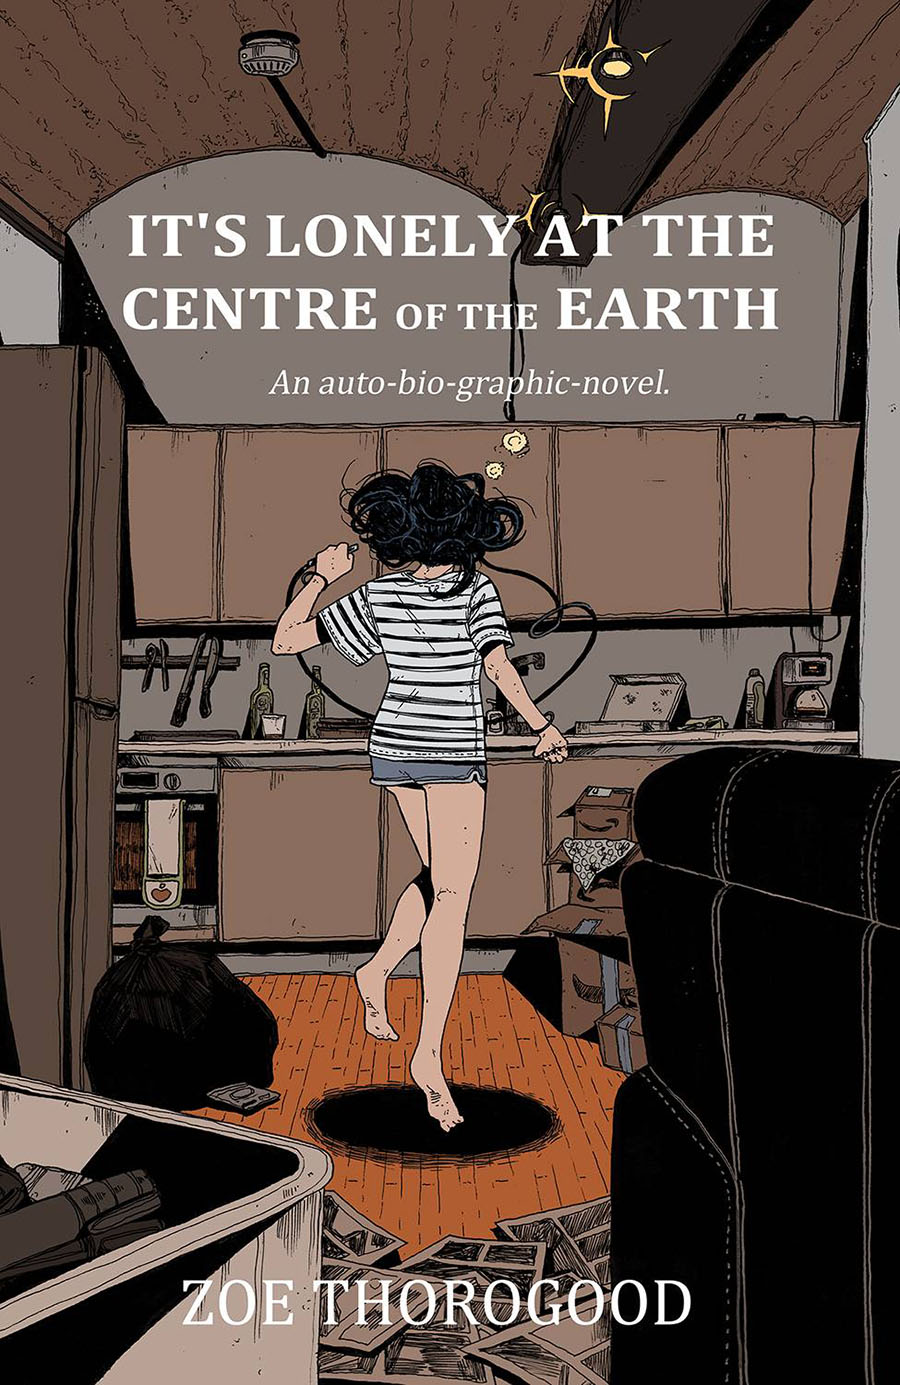 Its Lonely At The Centre Of The Earth An Auto-Bio-Graphic-Novel TP